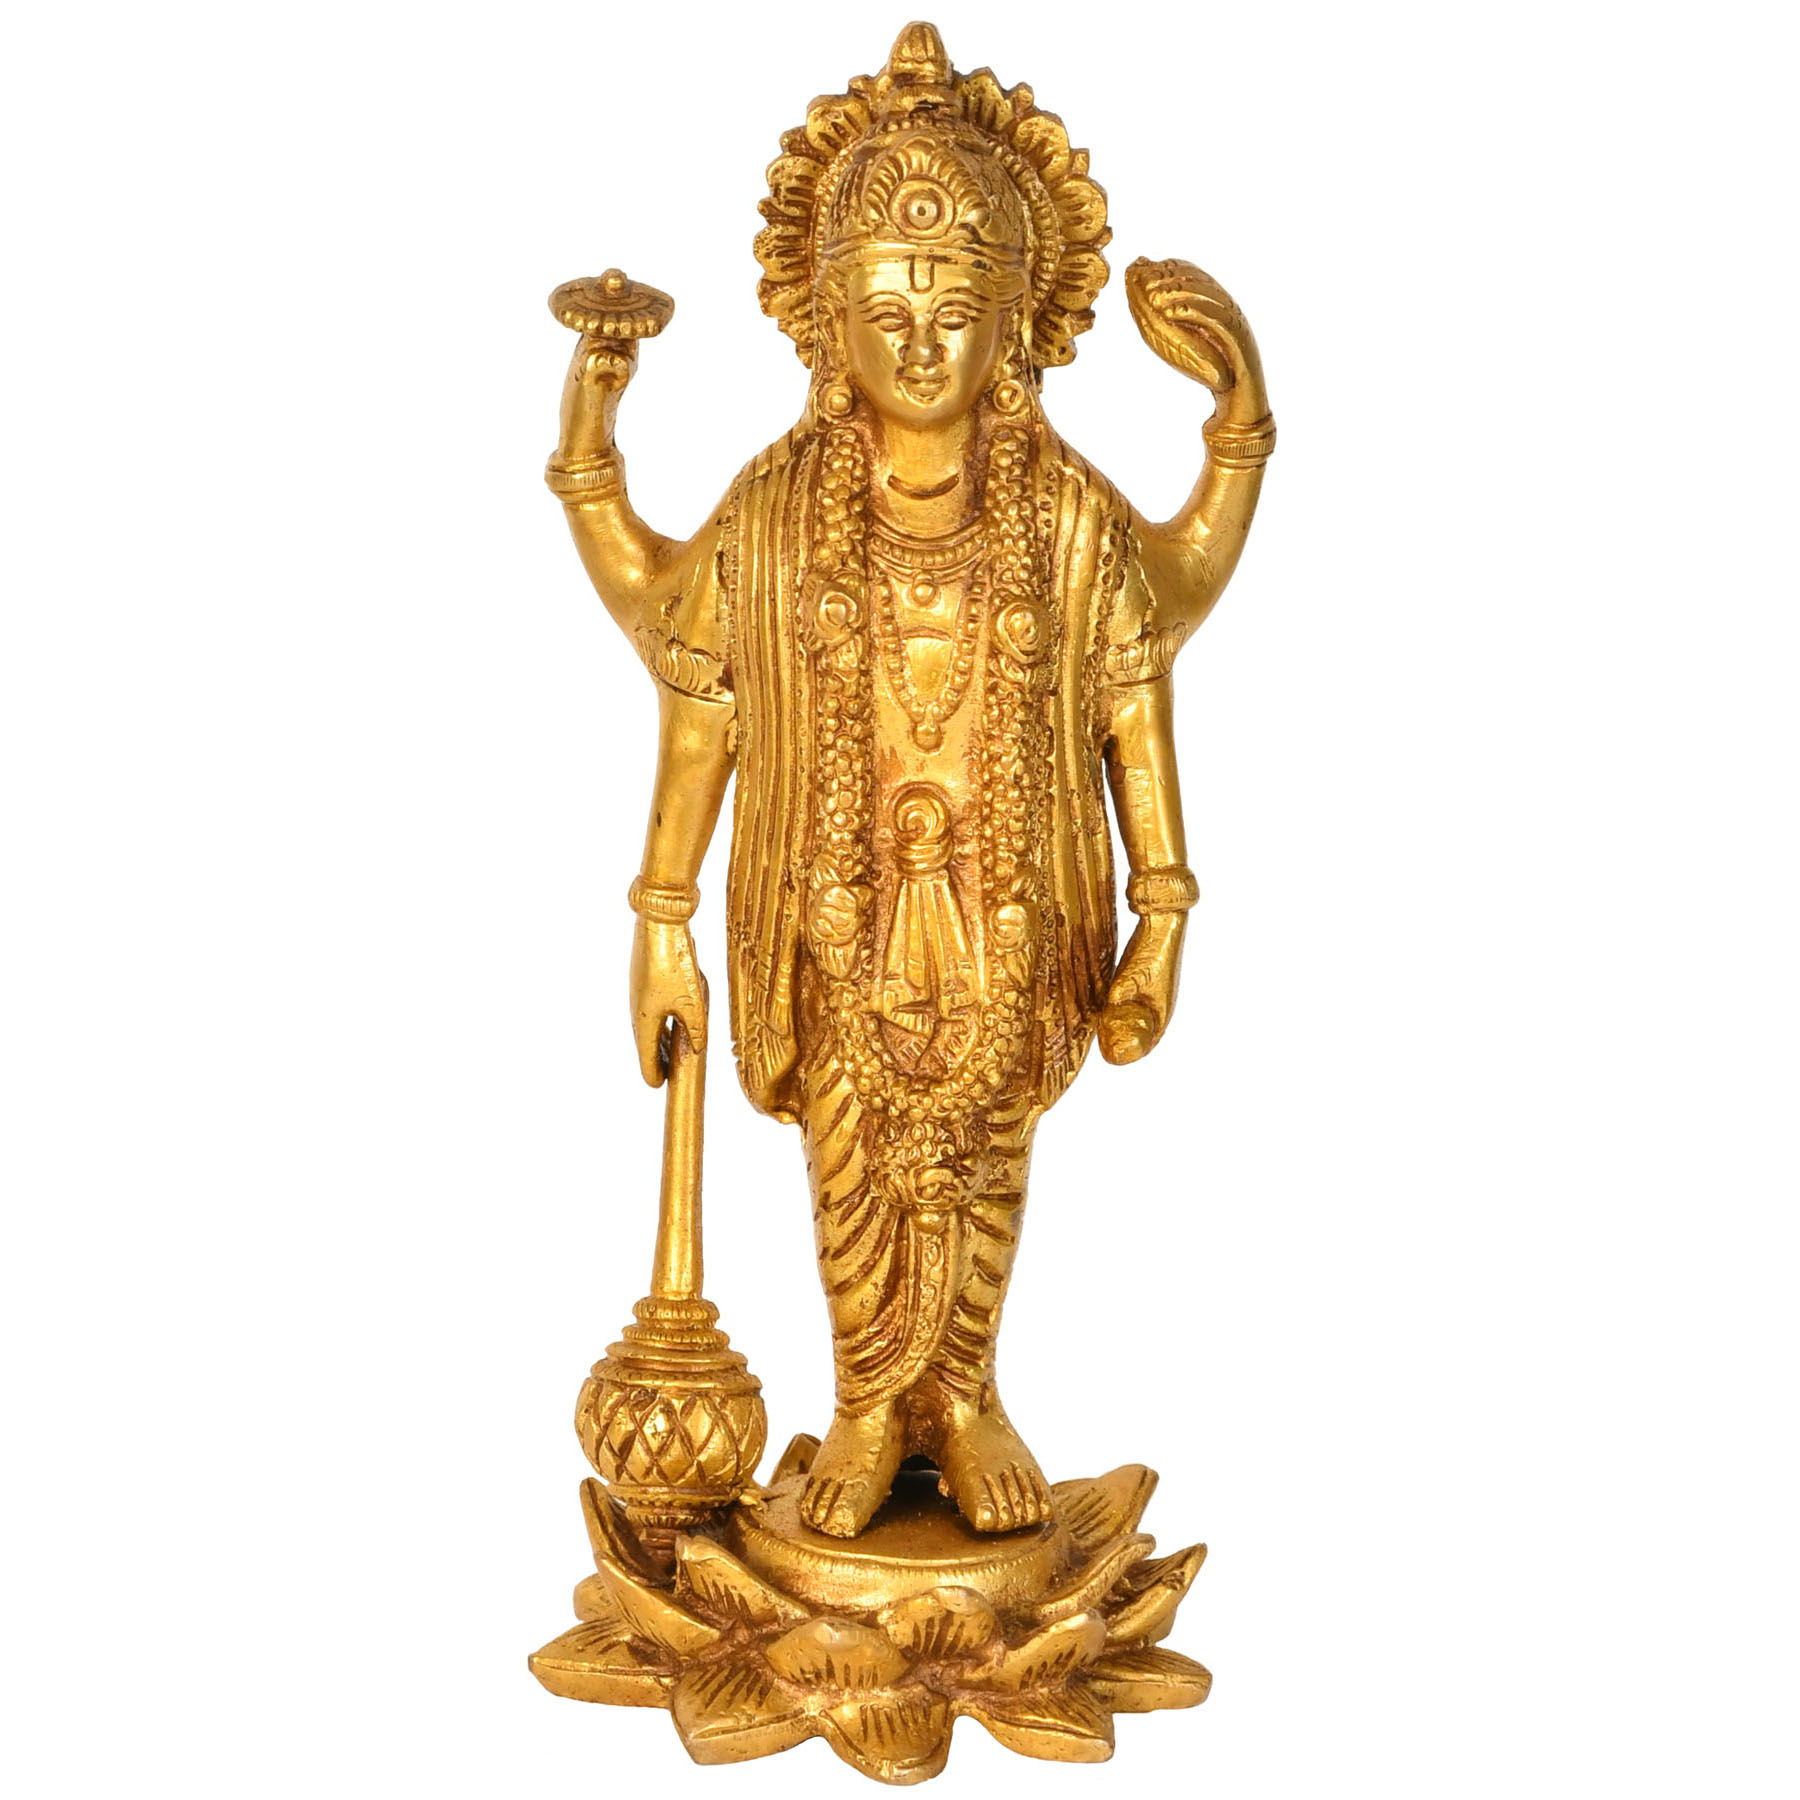 Brass sculpture of Narayan the supreme being with his consort